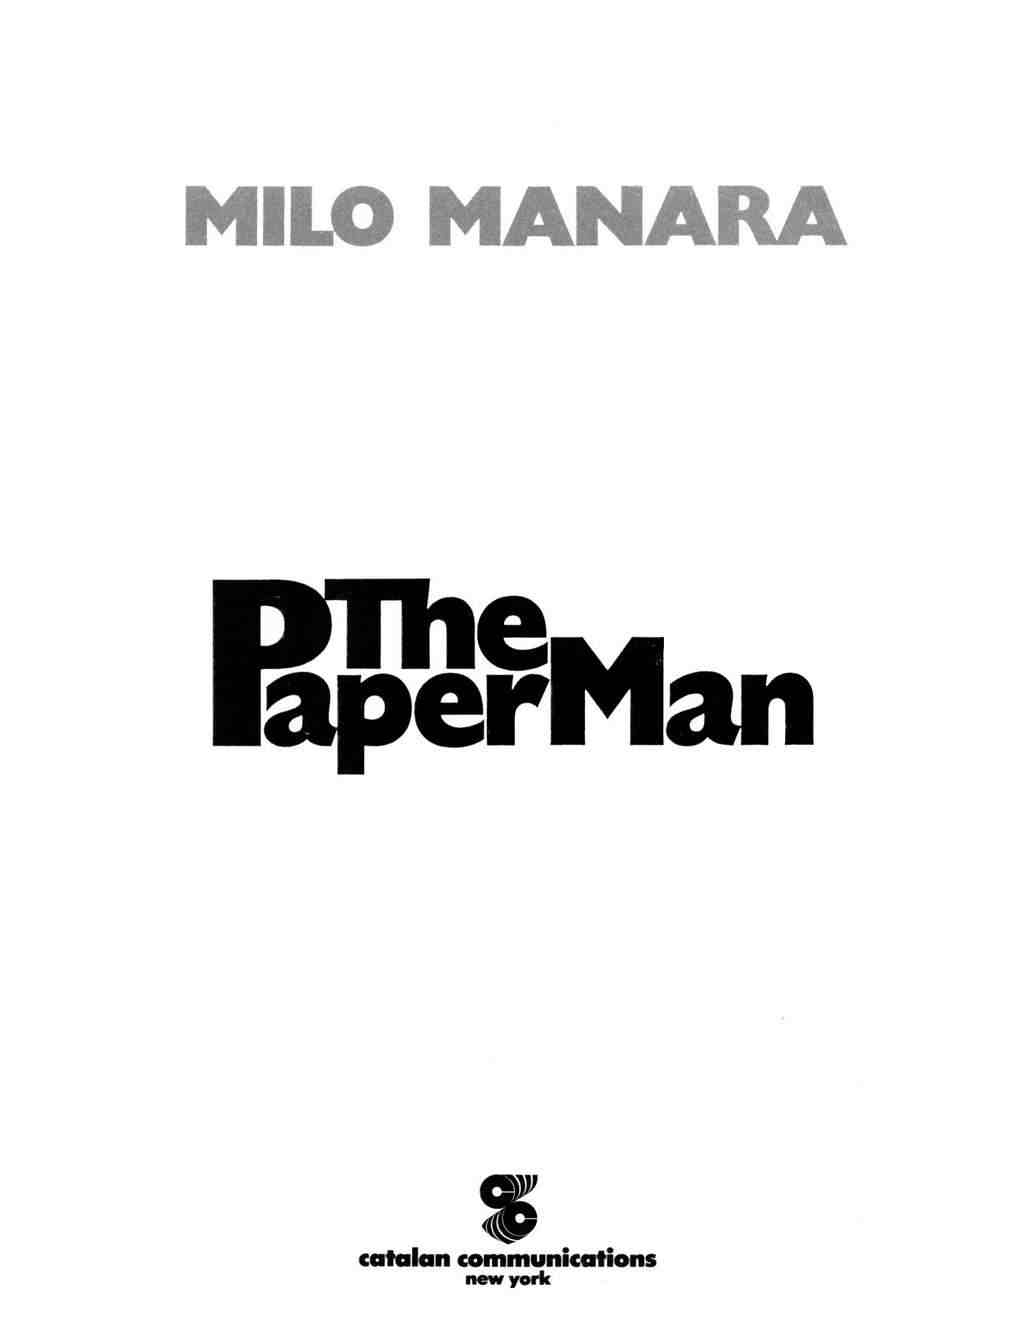 Read online The Paper Man comic -  Issue # Full - 5